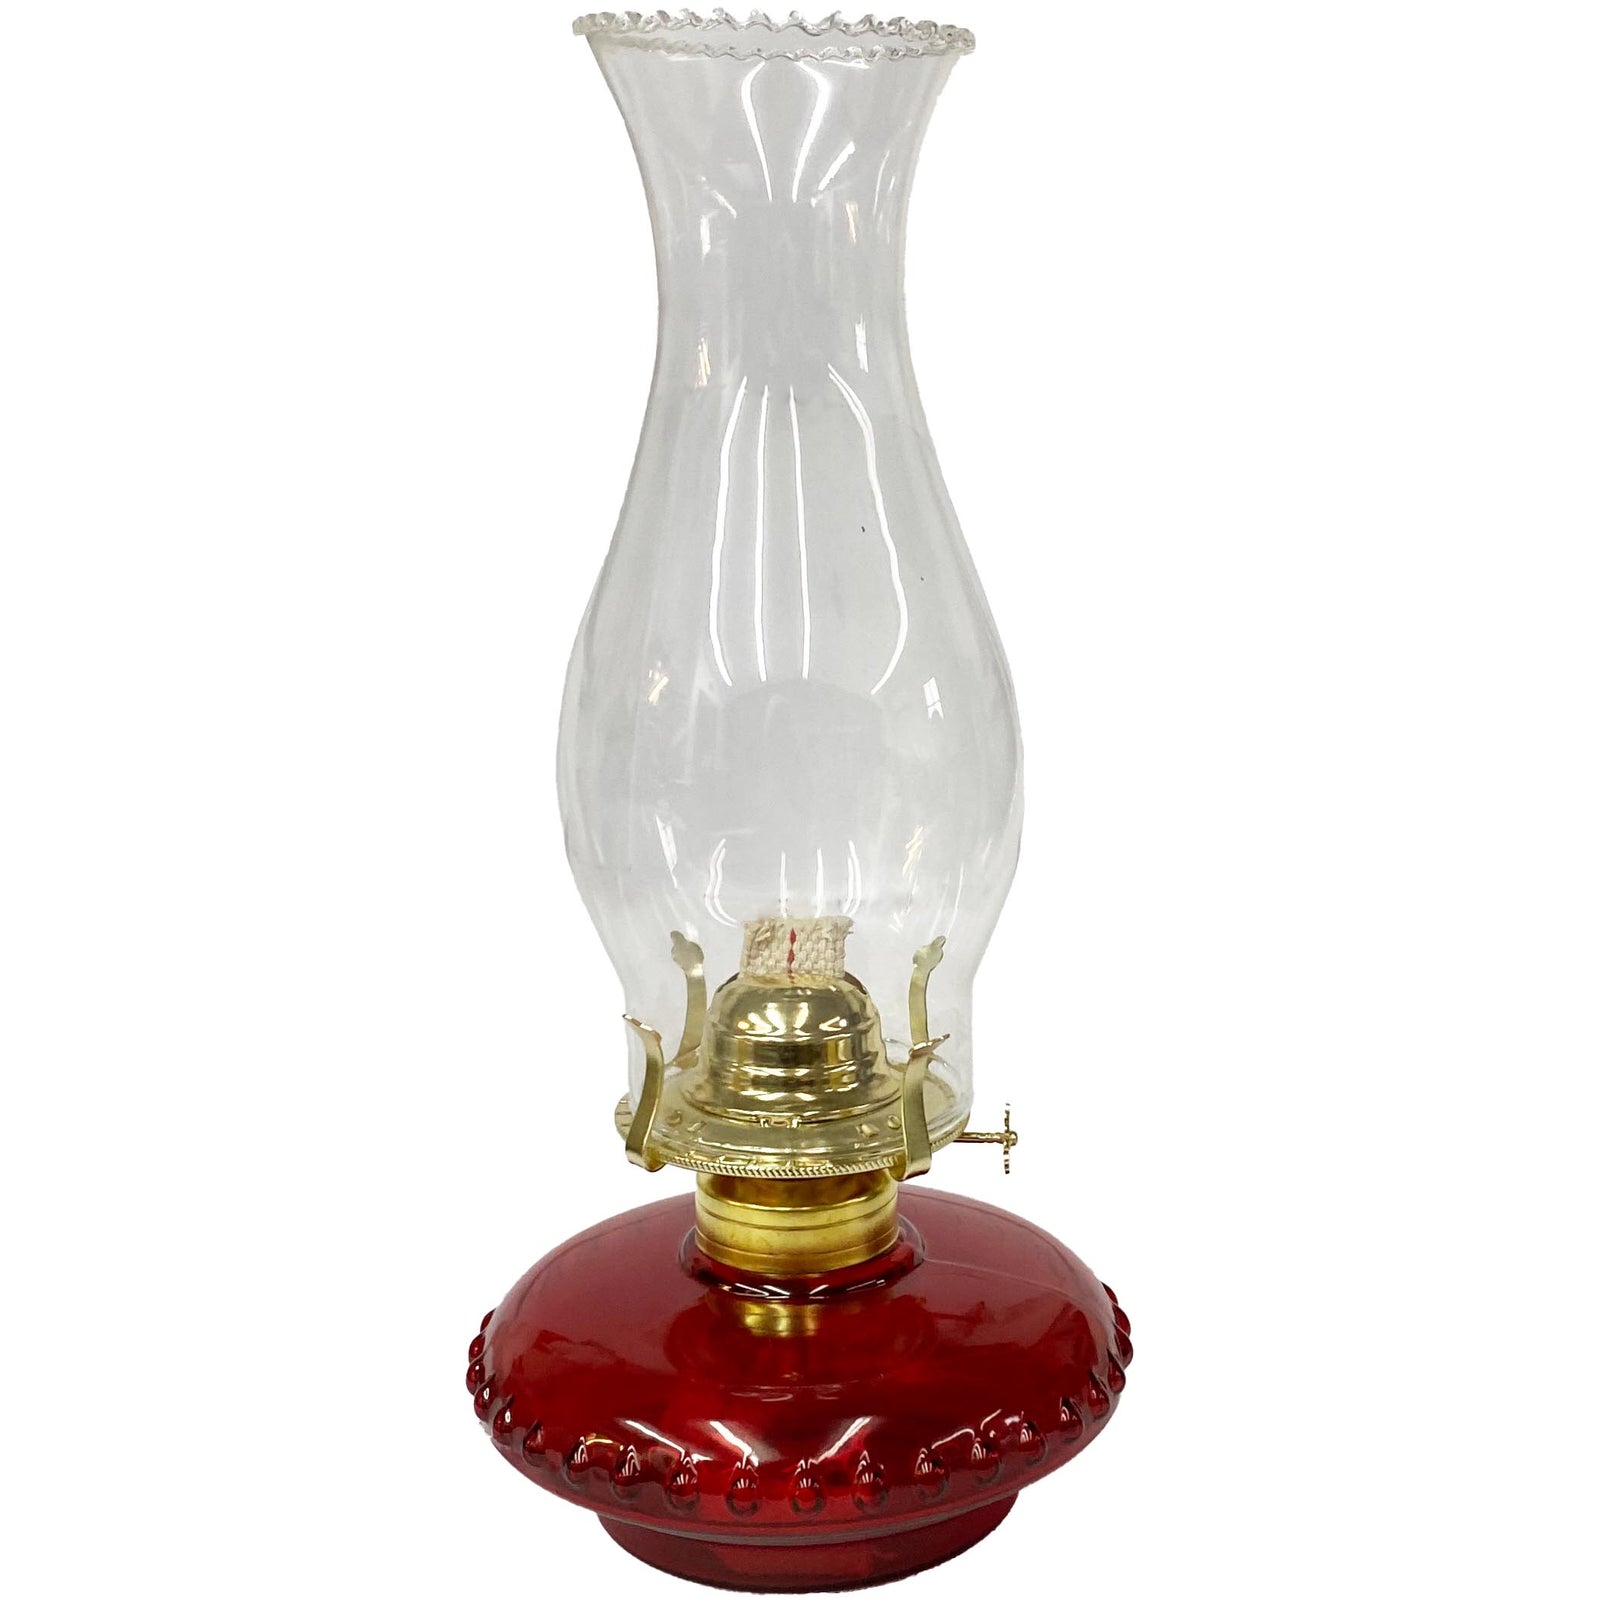 Small red glass oil lamp, paxton hardware